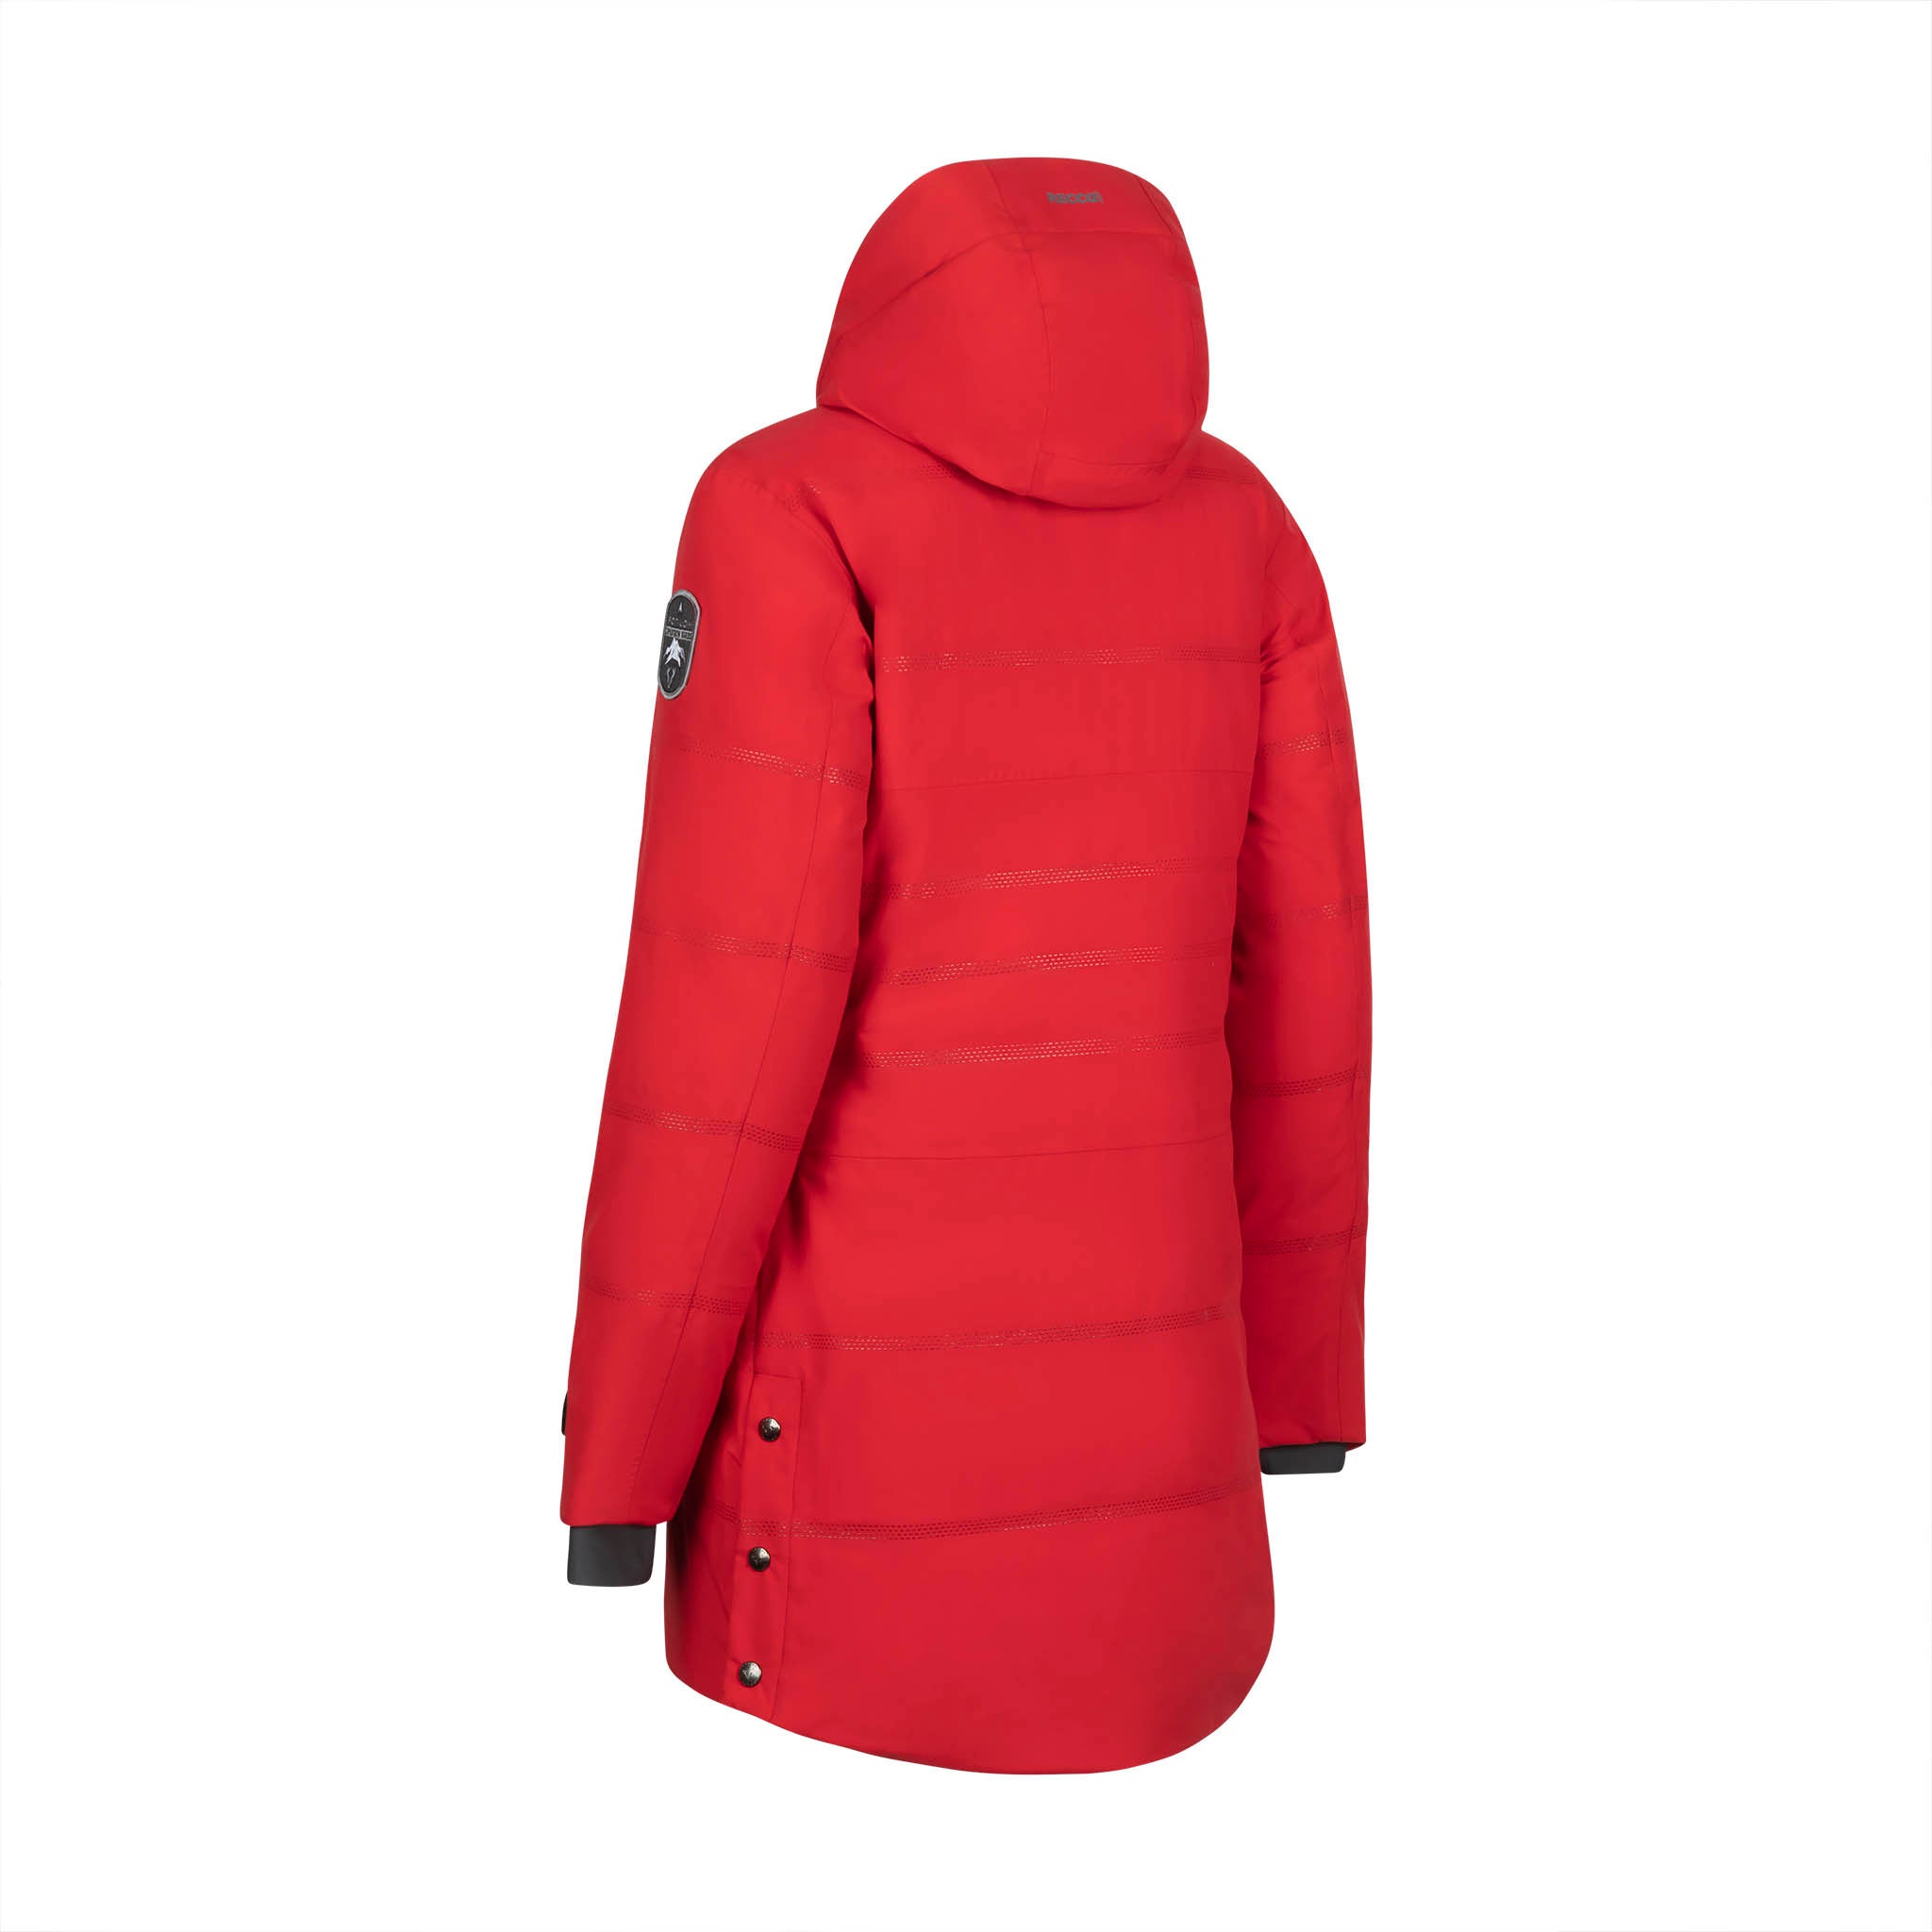 Women's Raincoats and Waterproof Jackets - Arctic Expedition Outerwear